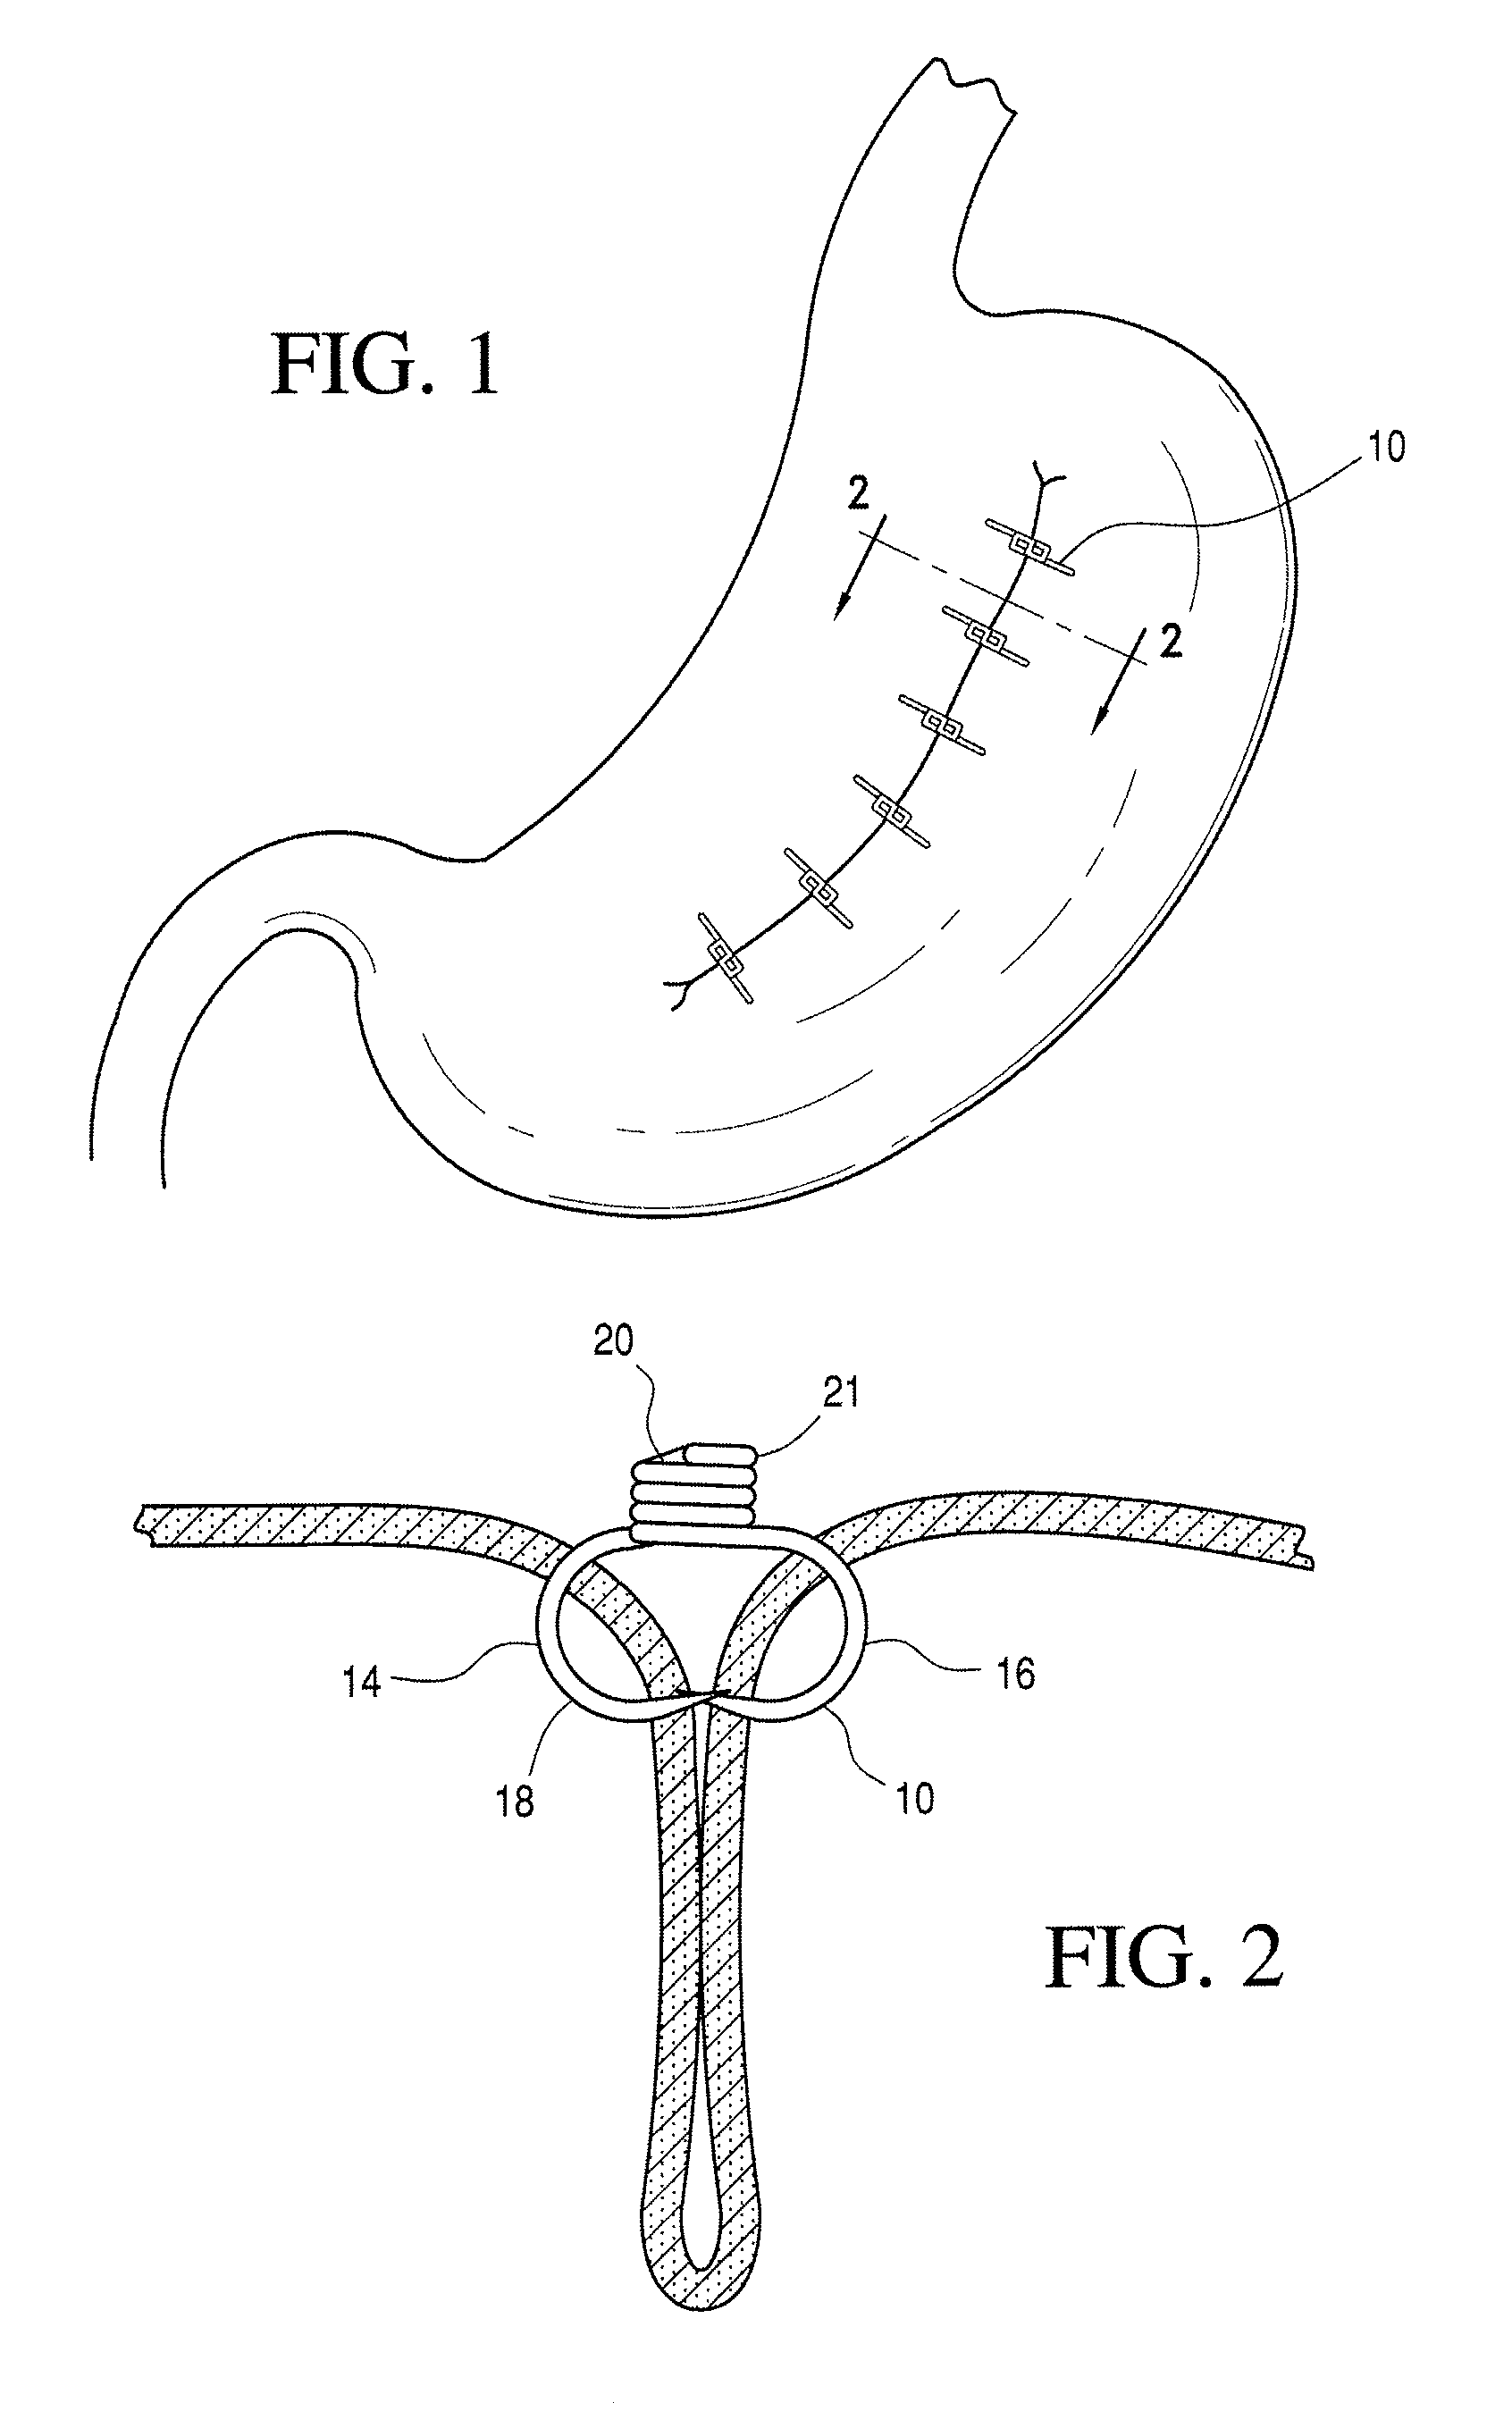 Clip and delivery assembly used in forming a tissue fold